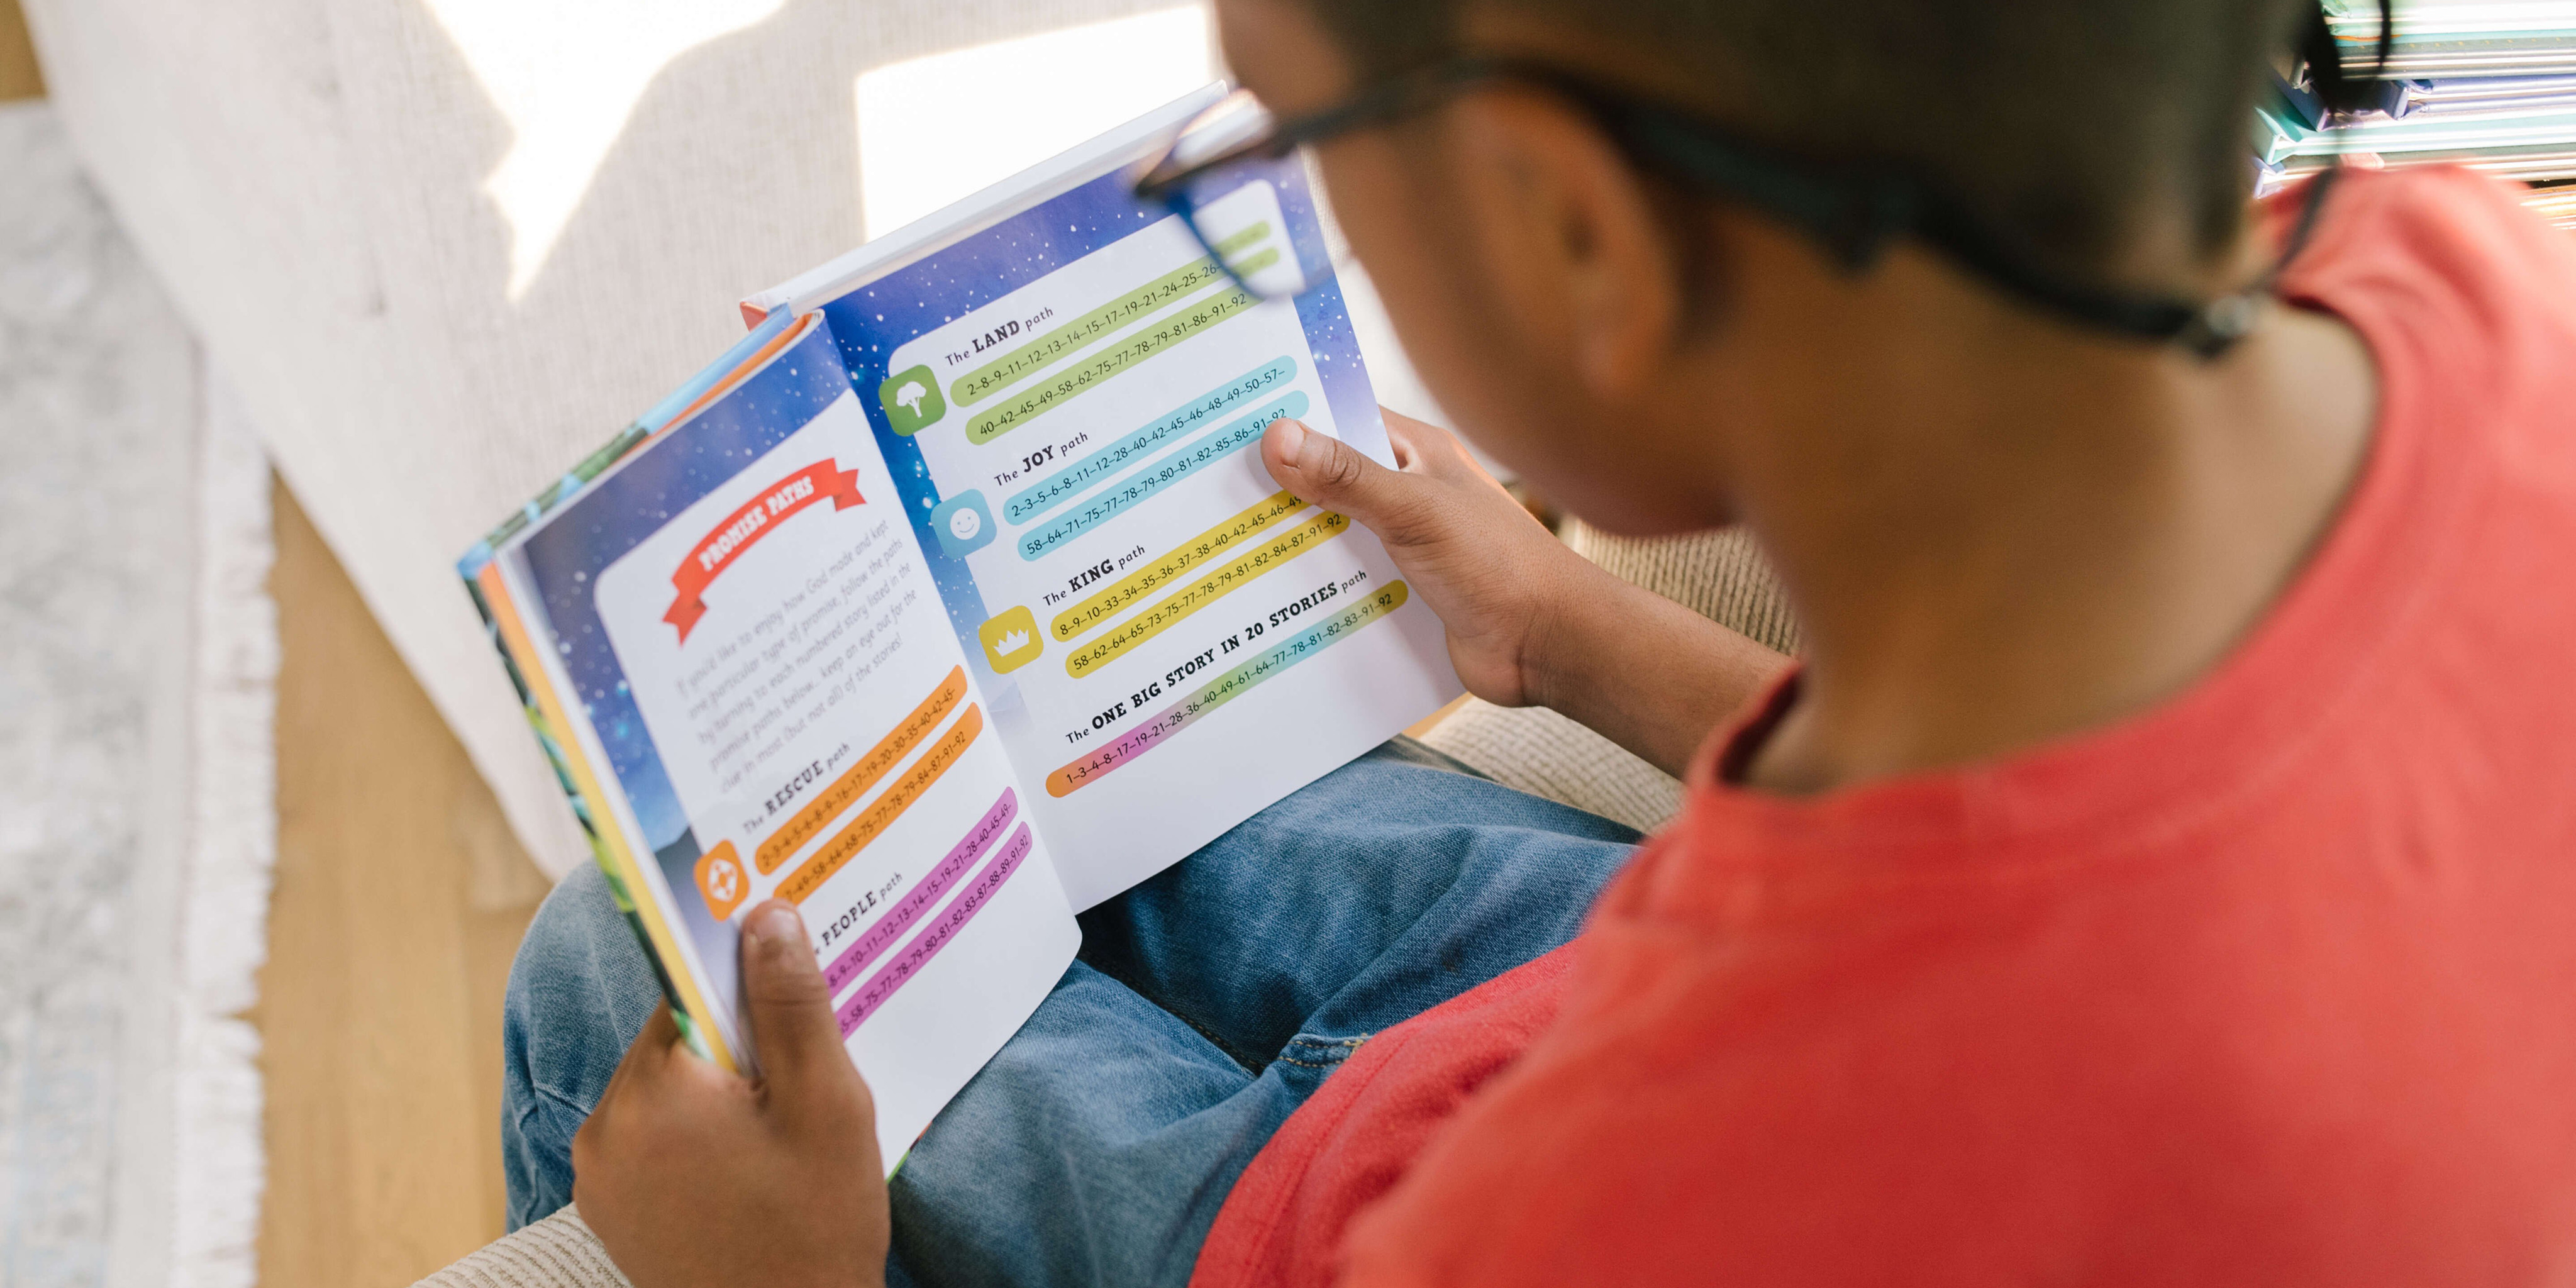 Photograph of a boy who is seated reading a page of God's Big Promises Bible Storybook which shows the various Promise Paths available in the Bible Storybook.